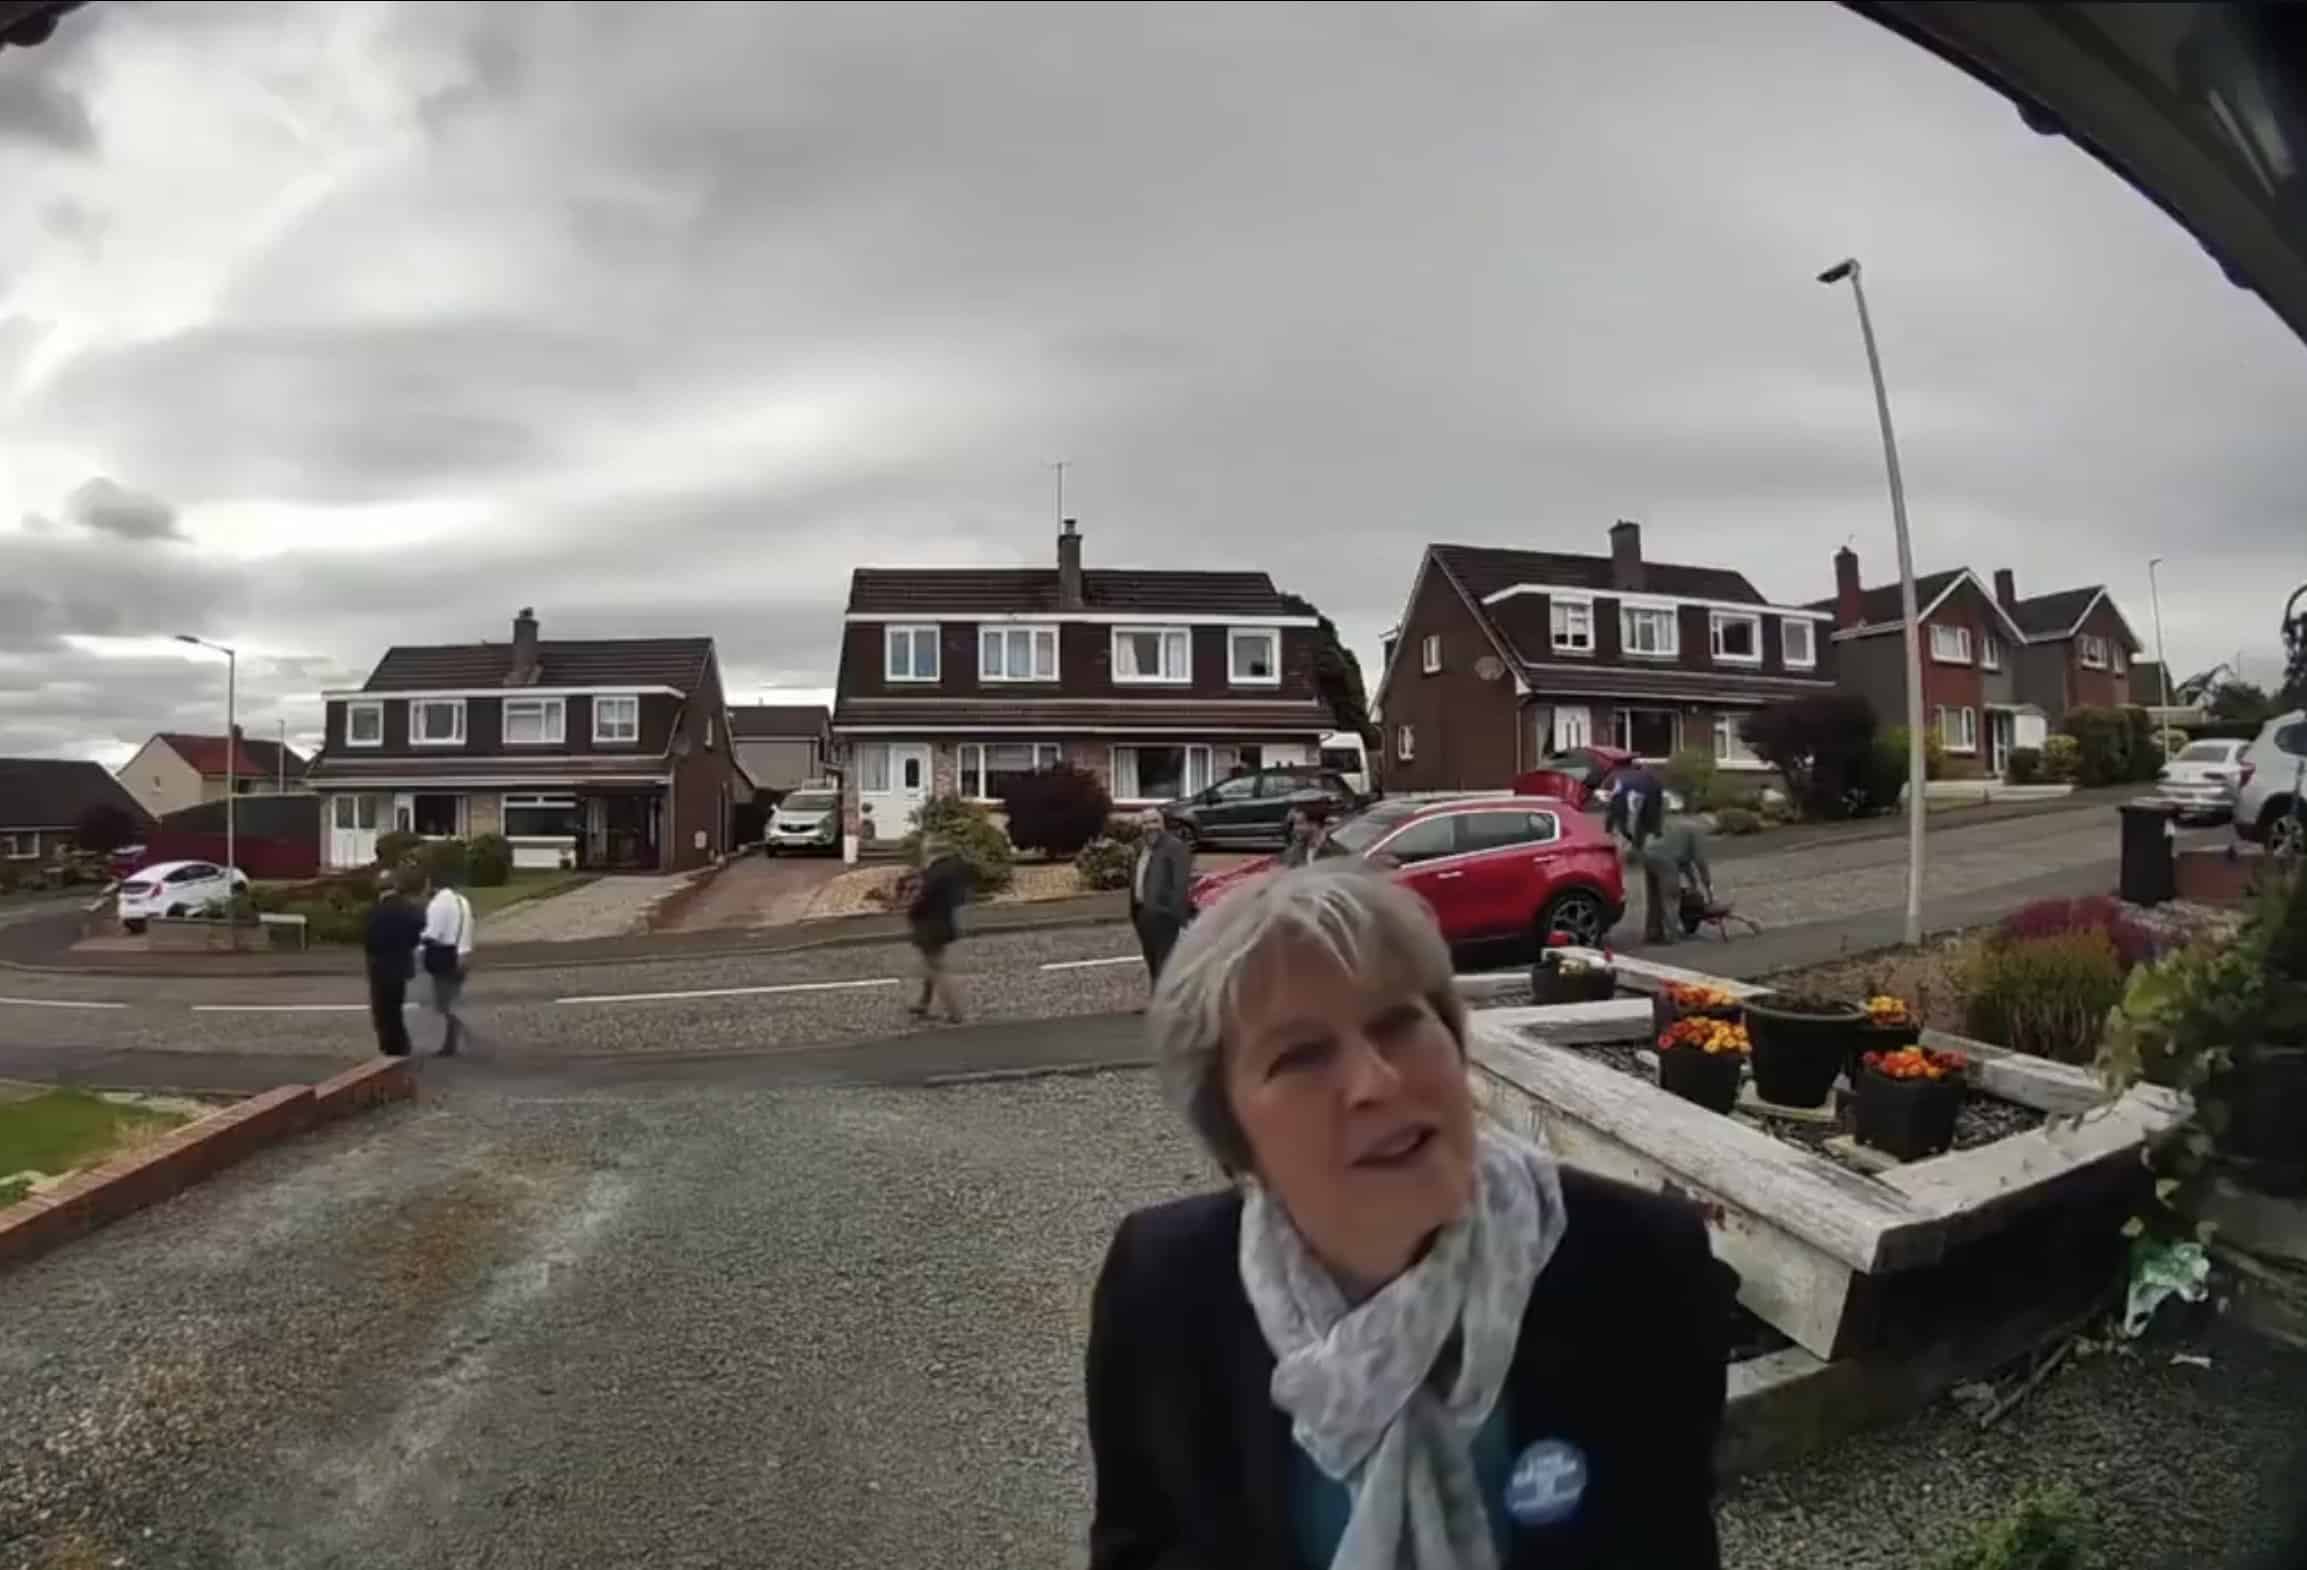 People can’t get over Theresa May door-knocking ahead of the election